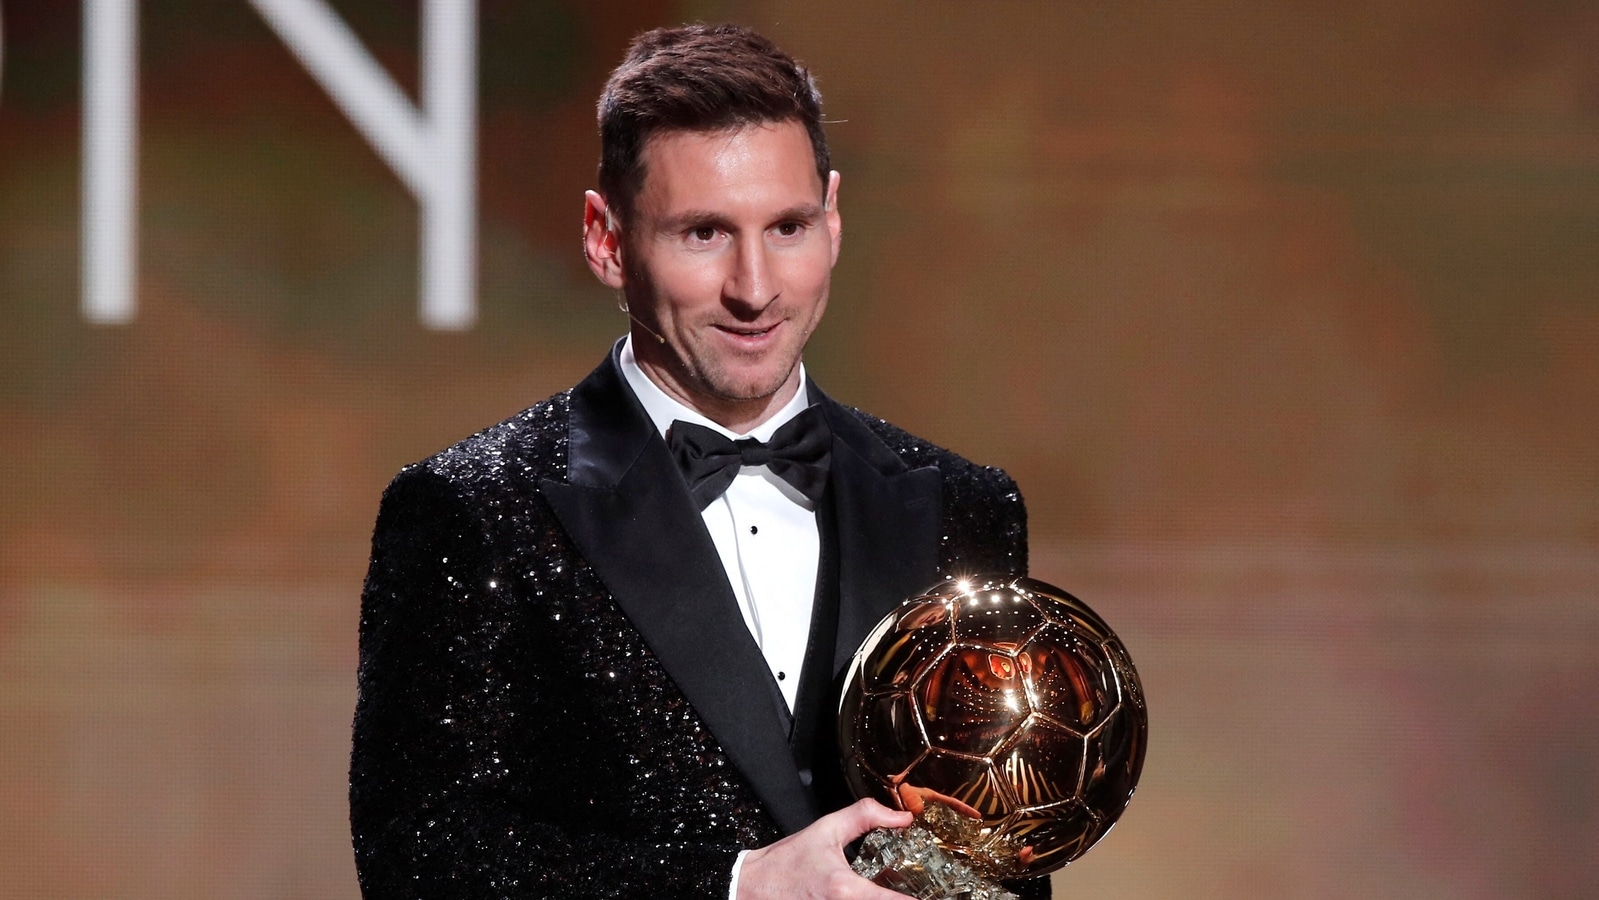 Messi: ‘No doubt’ that Benzema deserves to win Ballon d’Or